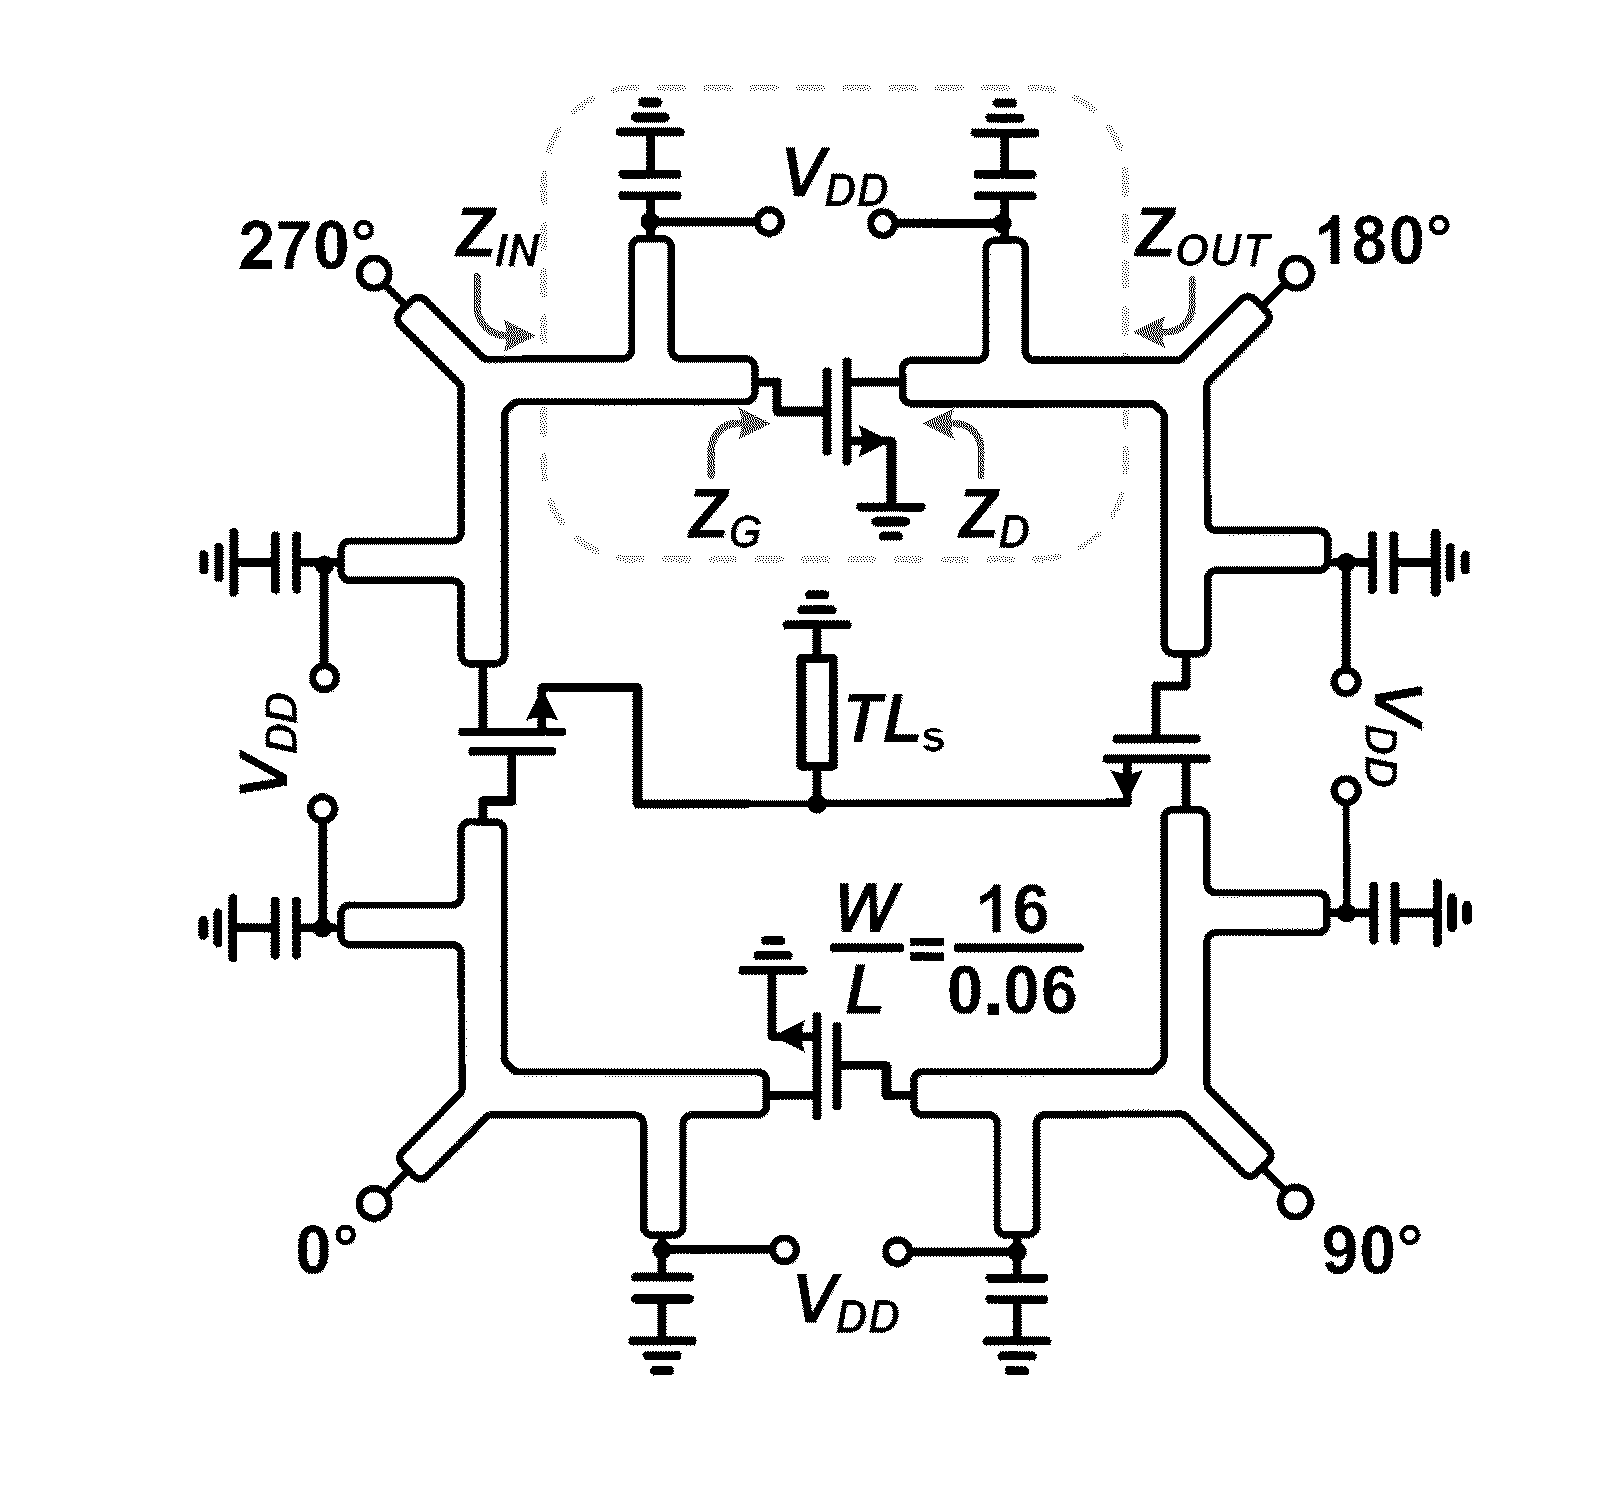 System and Method for Signal Generation